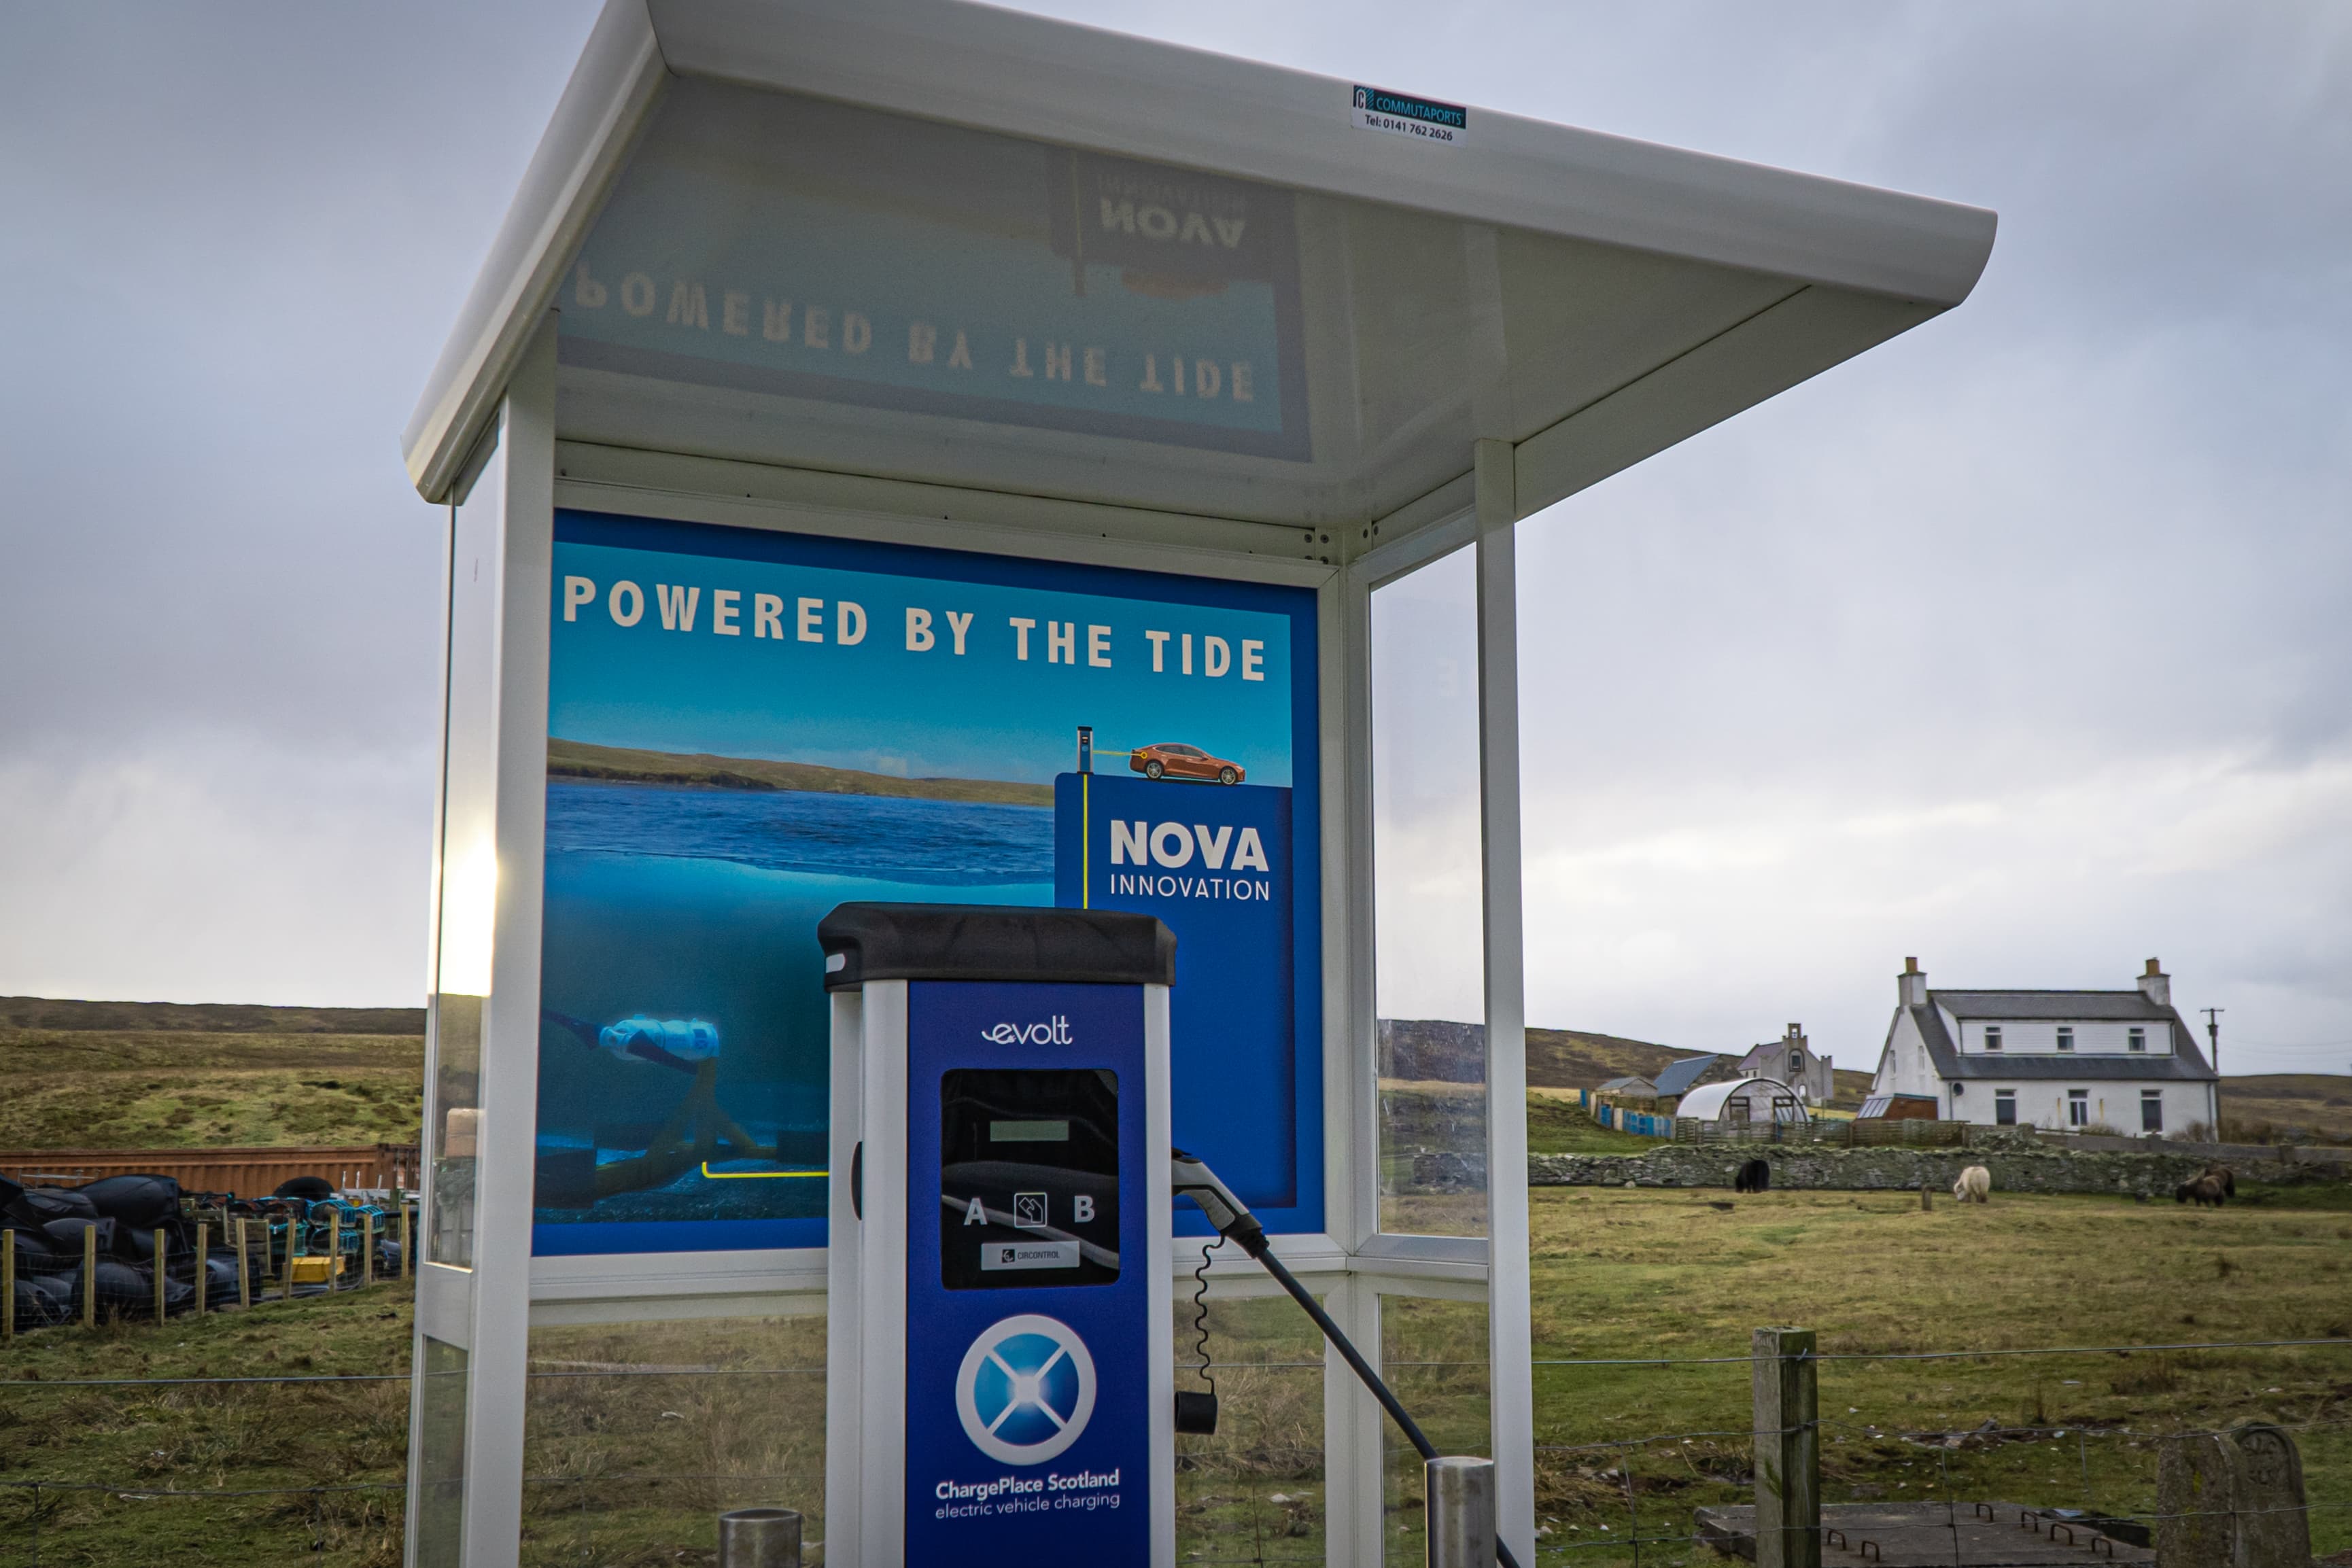 Tidal power delivers juice for electric vehicles on an island